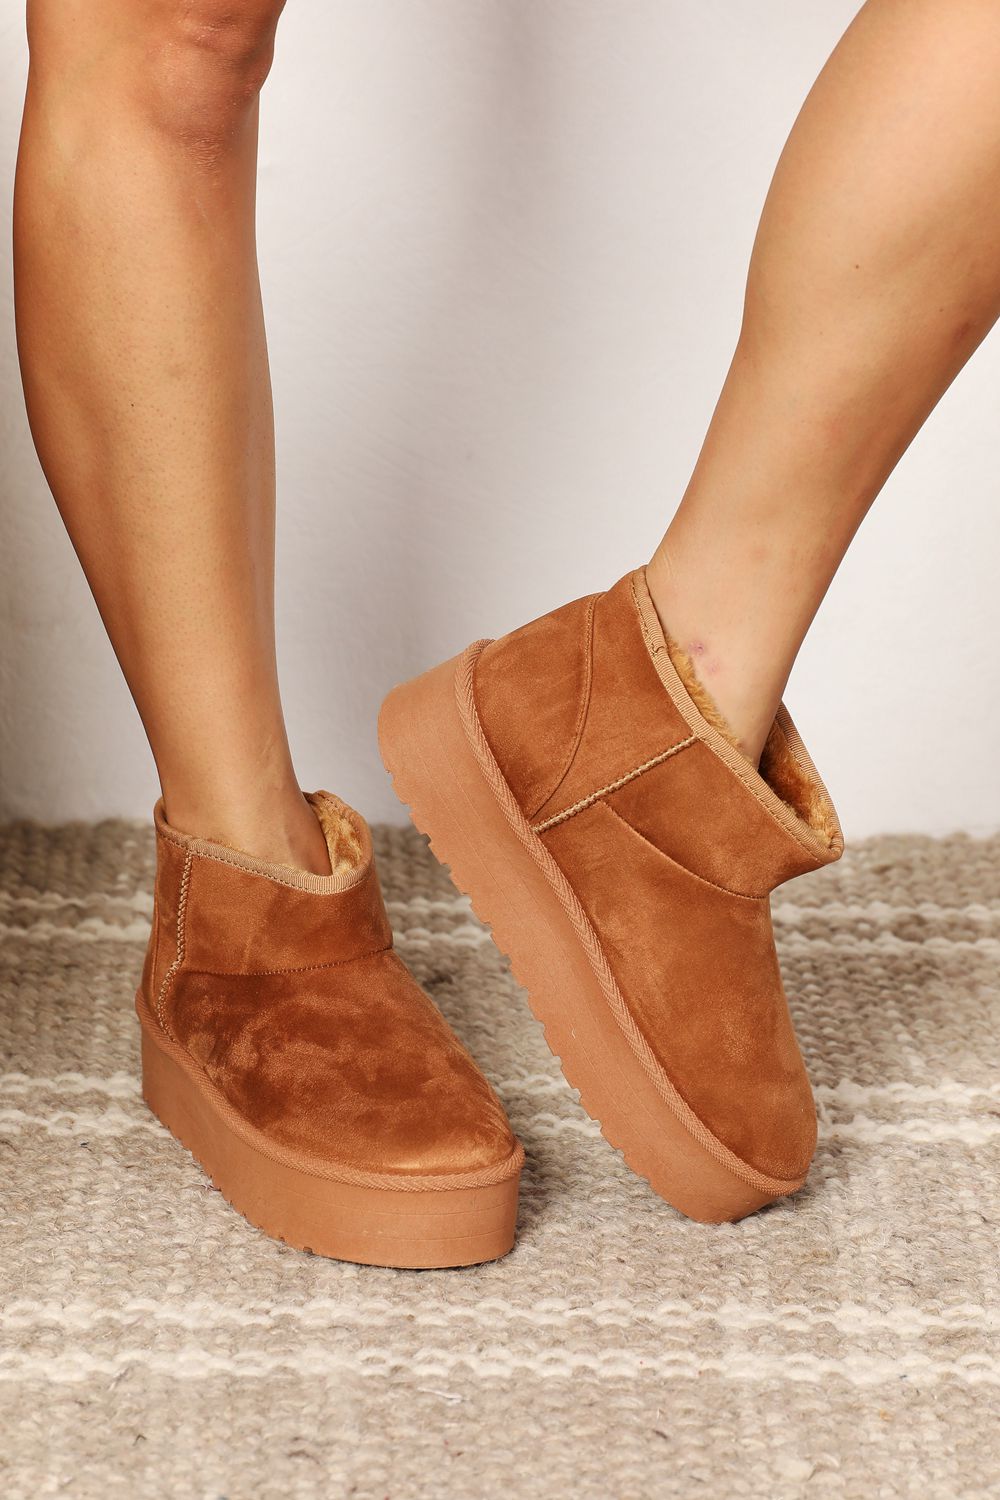 Hold Me Closer Camel Platform Mini Boots - Cheeky Chic Boutique